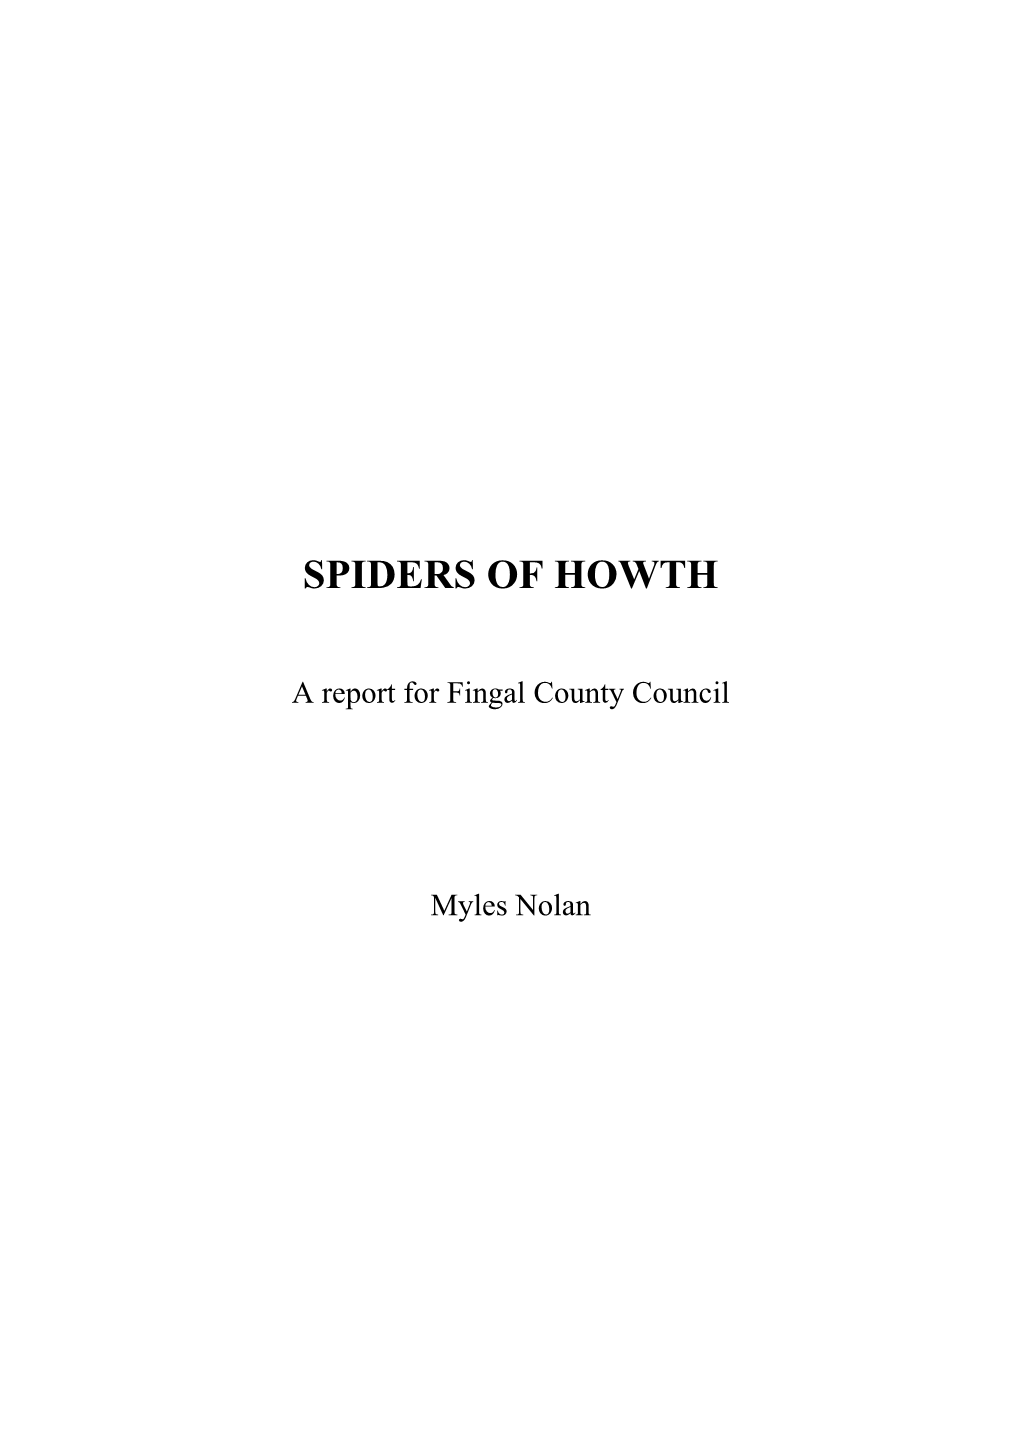 Spiders of Howth